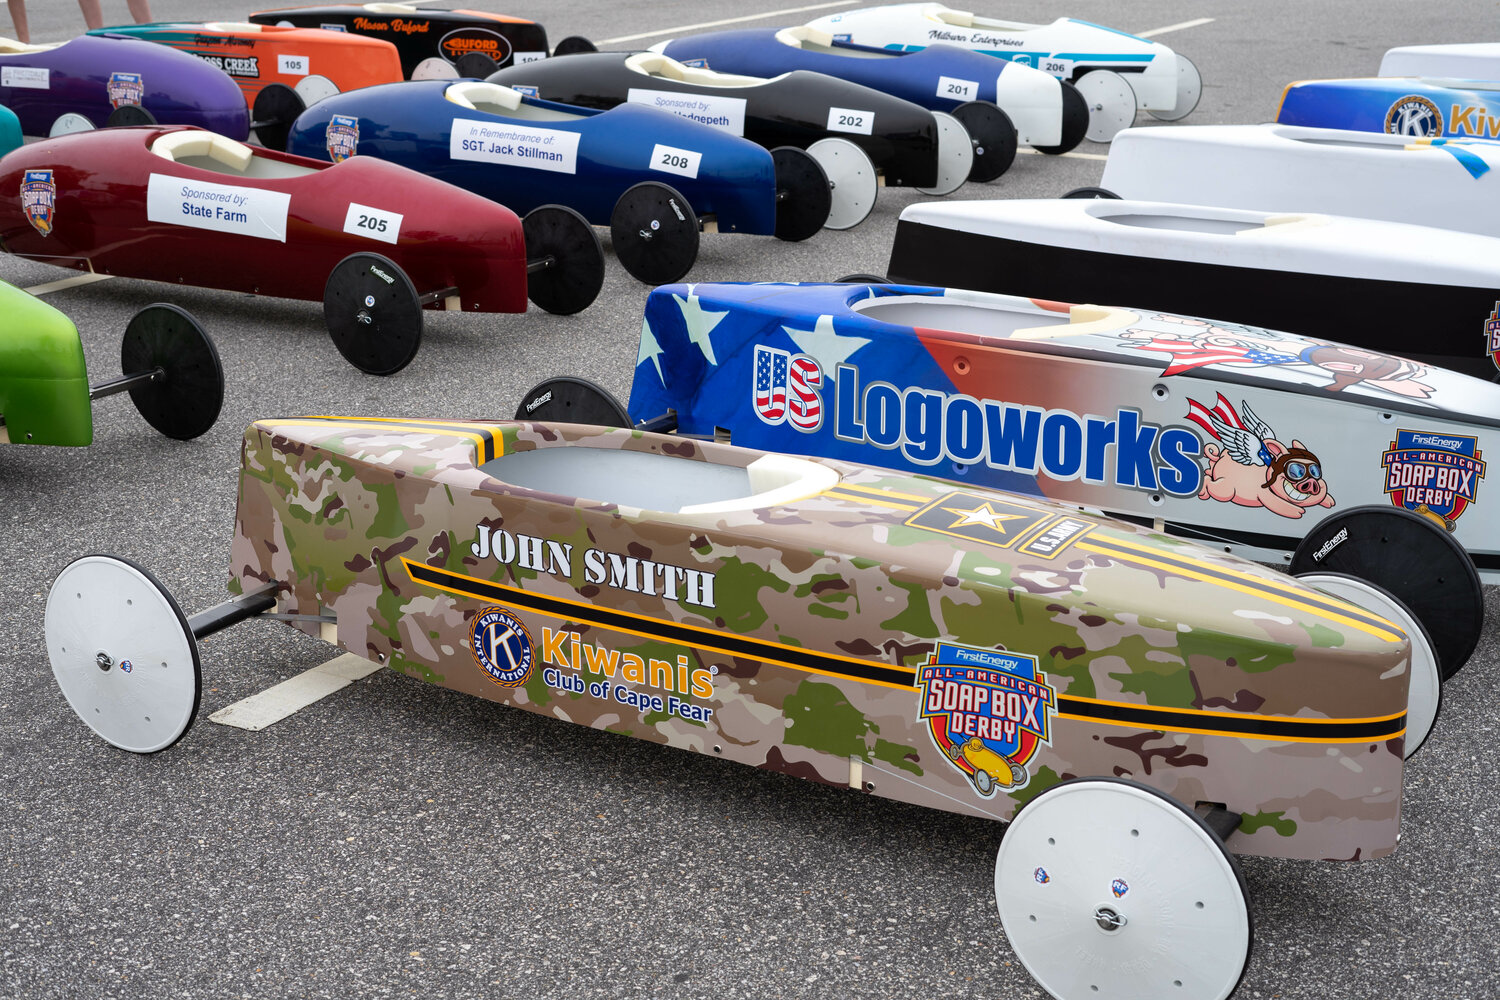 The Kiwanis Club held its Cape Fear Soap Box Derby on April 29 at the Charlie Rose Expo Center.